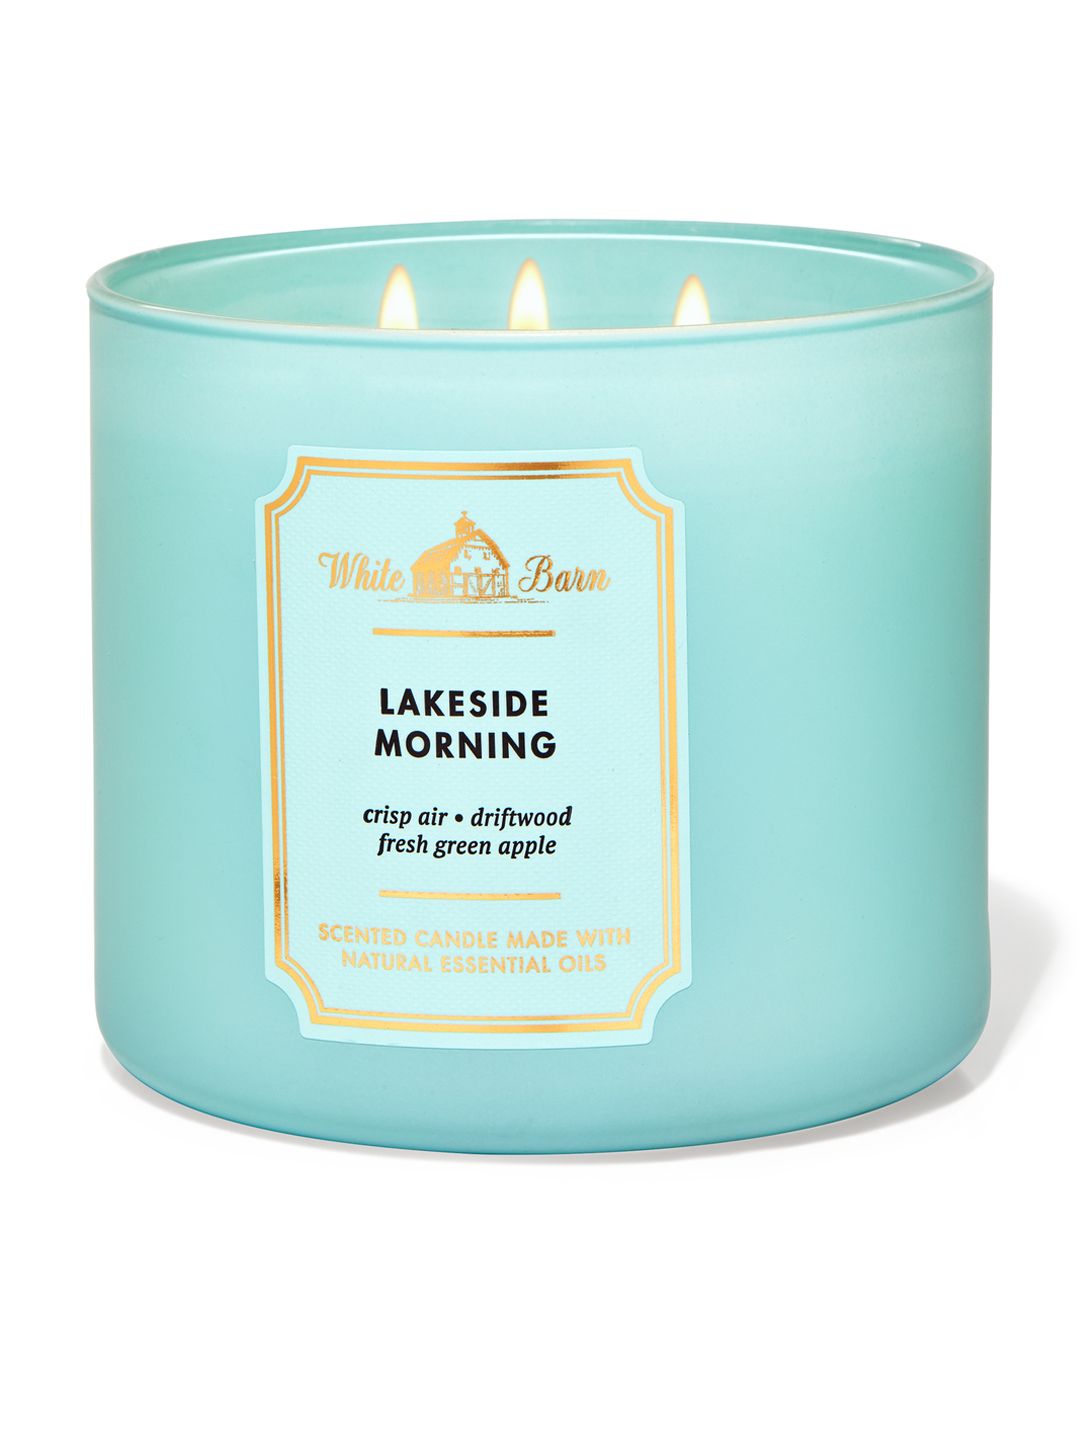 Bath & Body Works Lakeside Morning 3-Wick Scented Candle 411 g Price in India